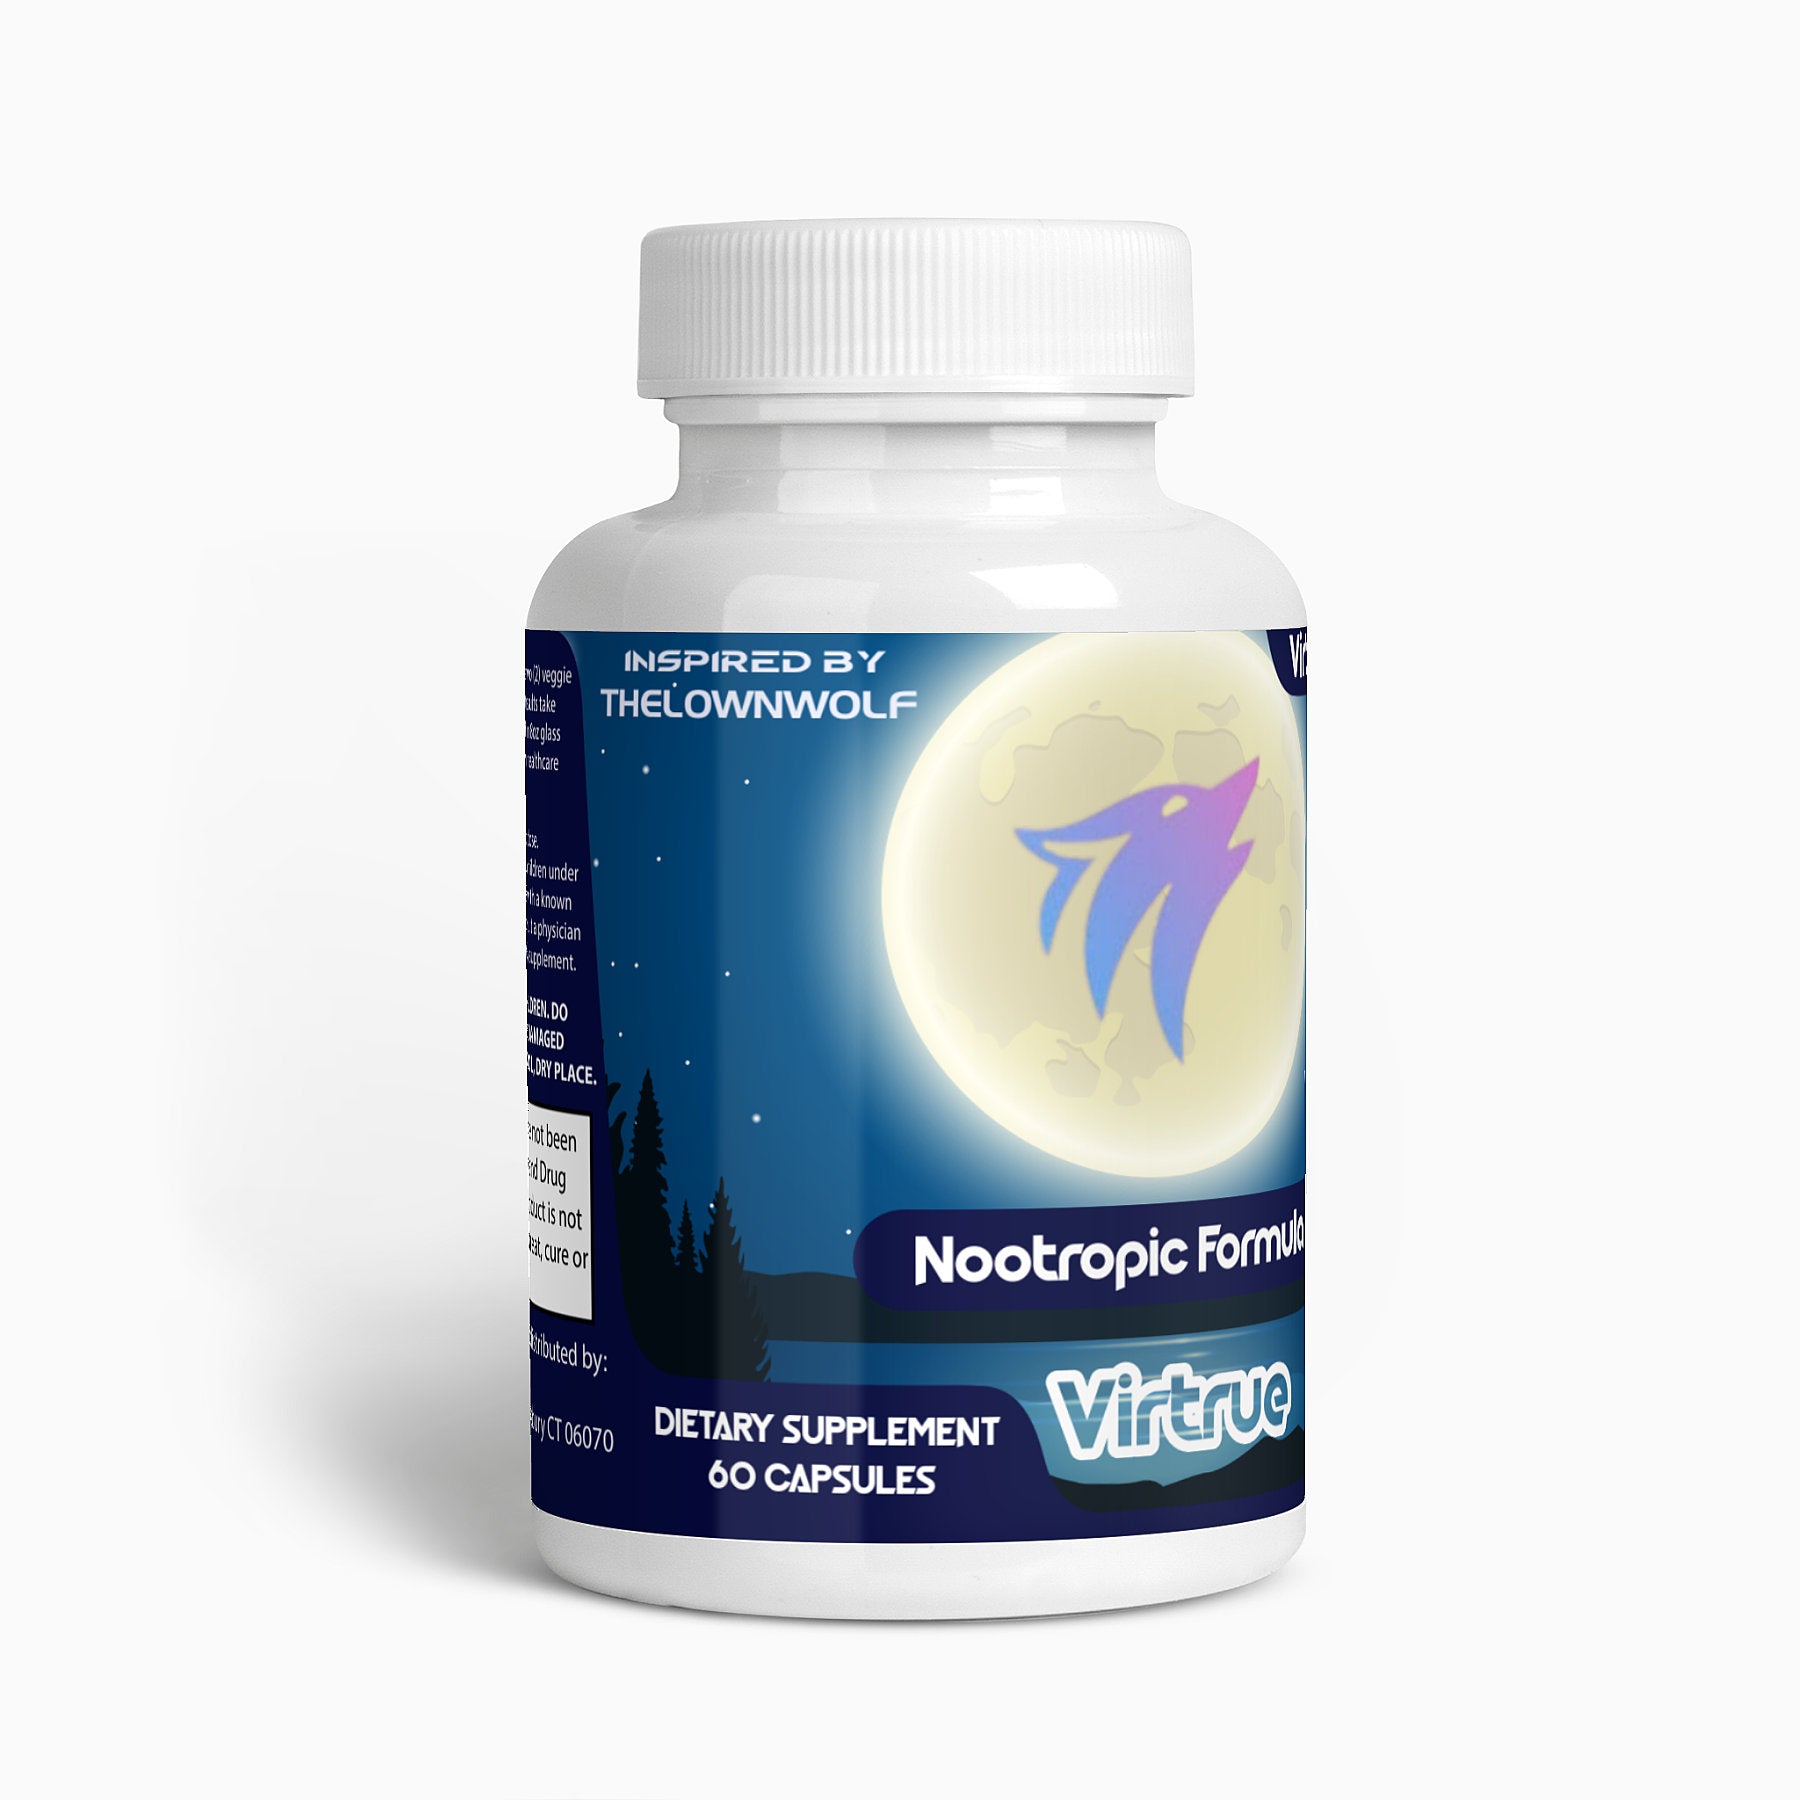 Nootropic Brain & Focus Formula - Inspired by THELOWNWOLF